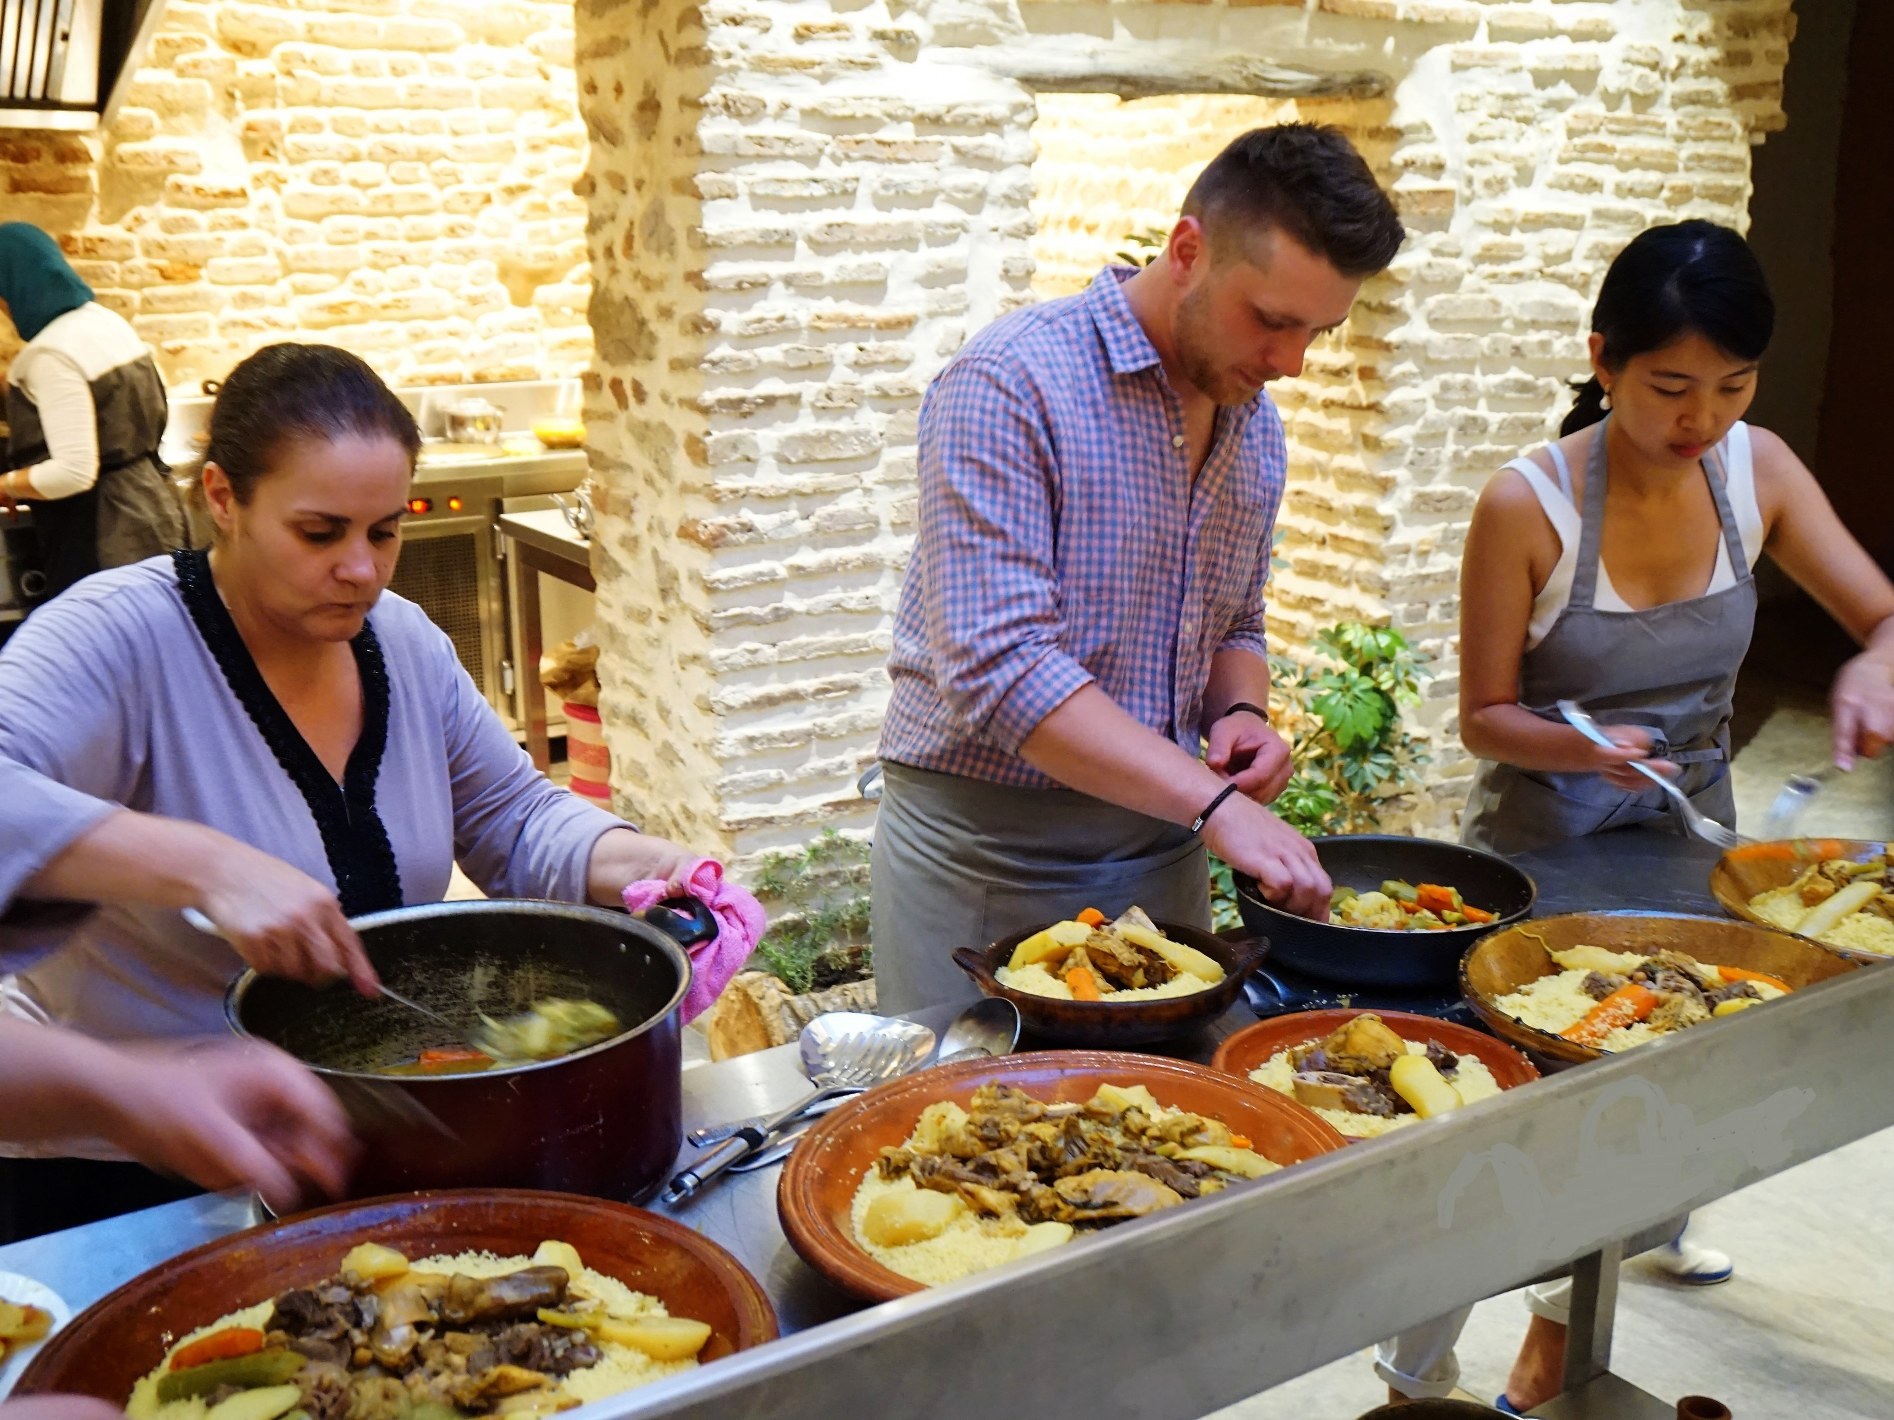 Morocco cooking class tour in Essaouira to cook traditional dishes